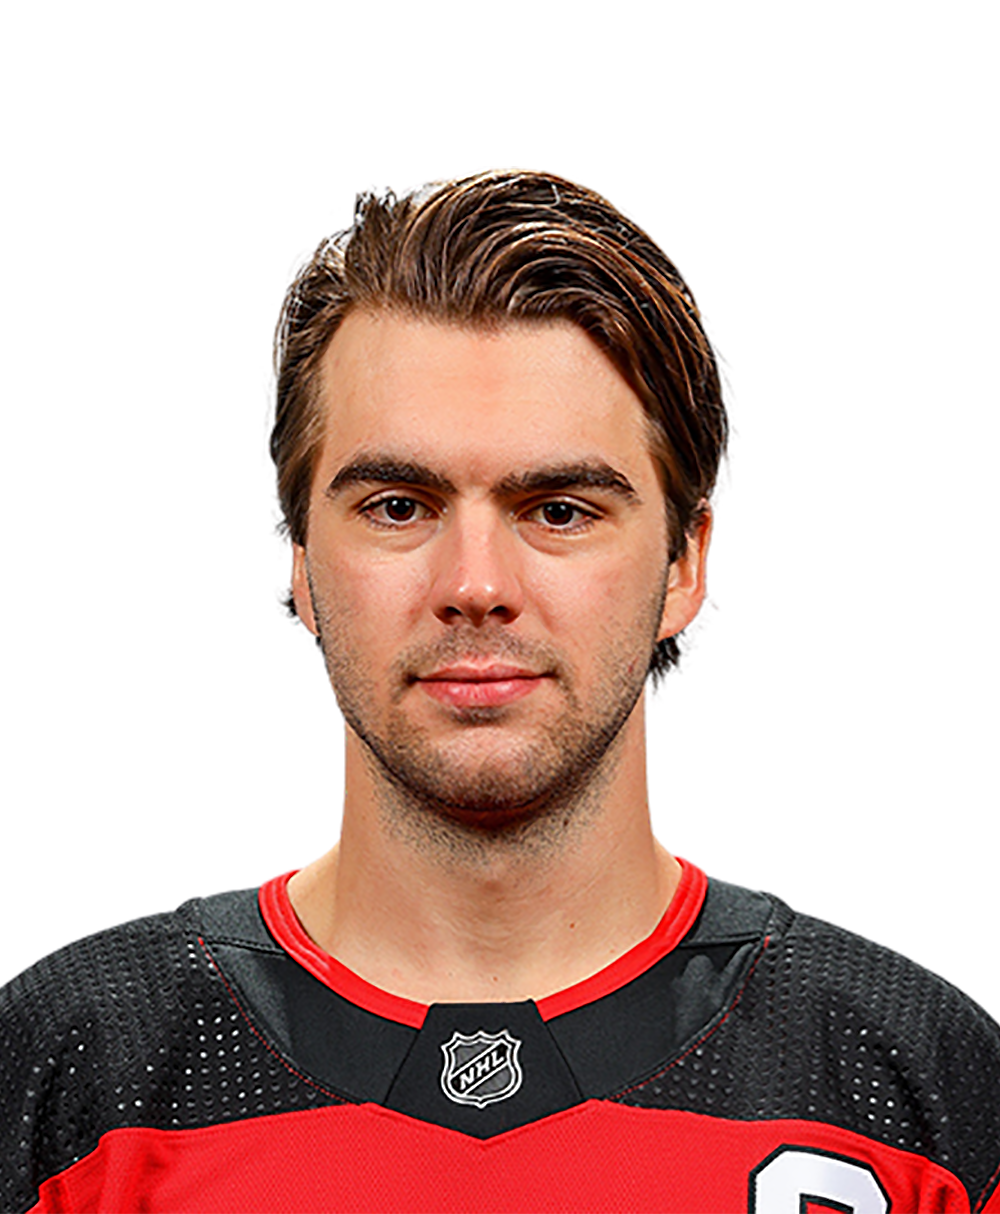 2 years ago today, Nico Hischier was named the 12th captain in